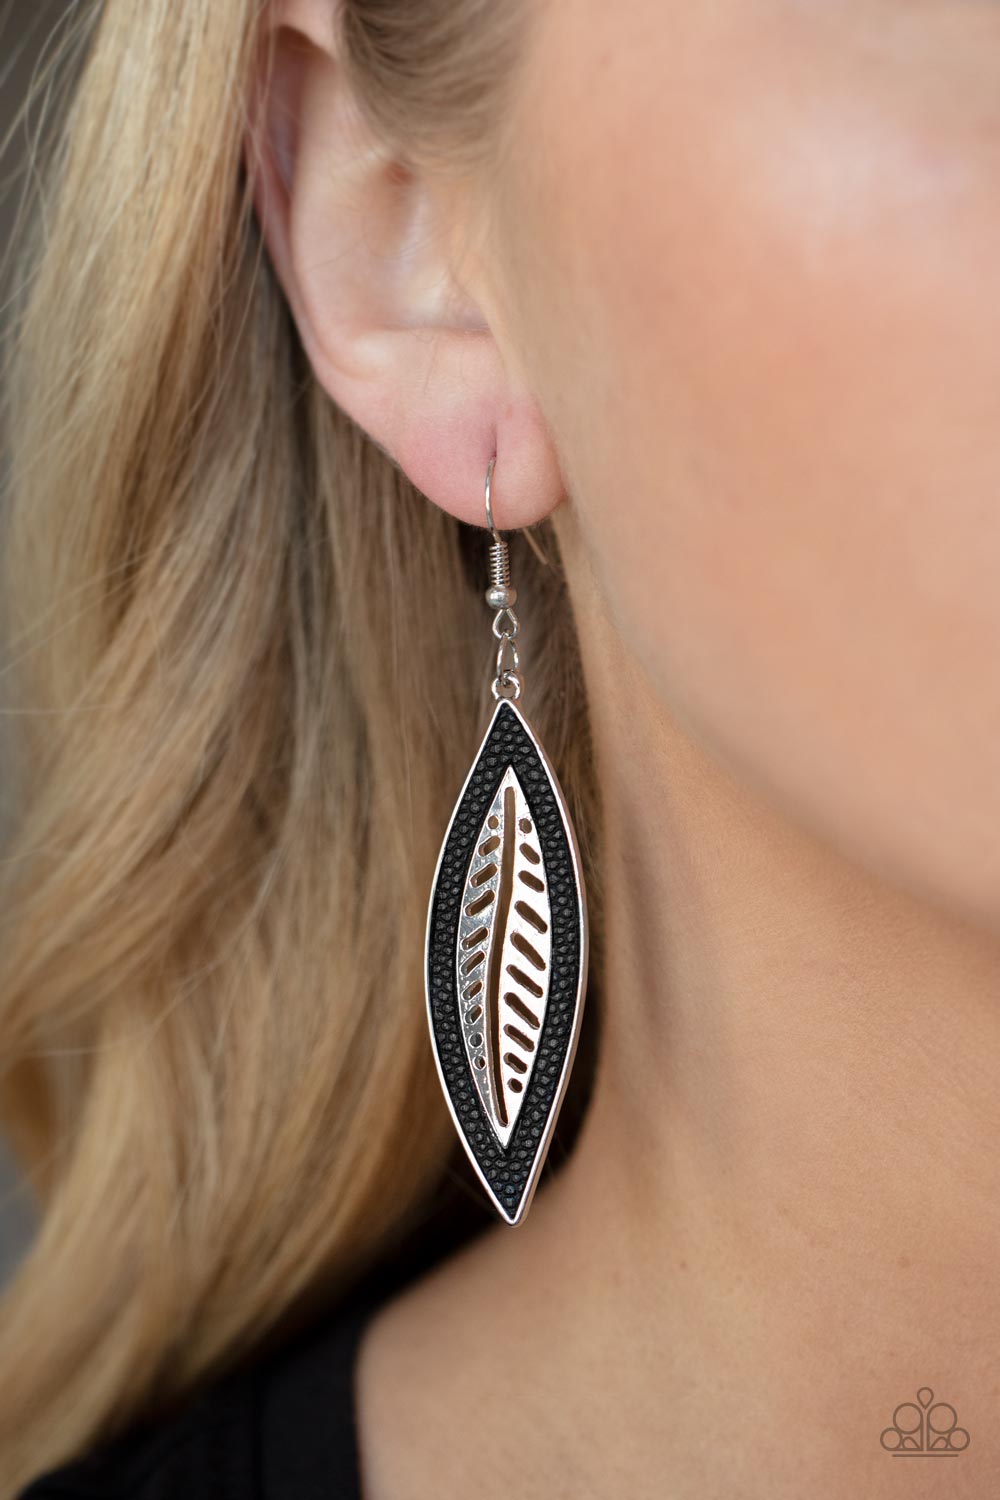 Leather Lagoon- Black and Silver Earrings- Paparazzi Accessories